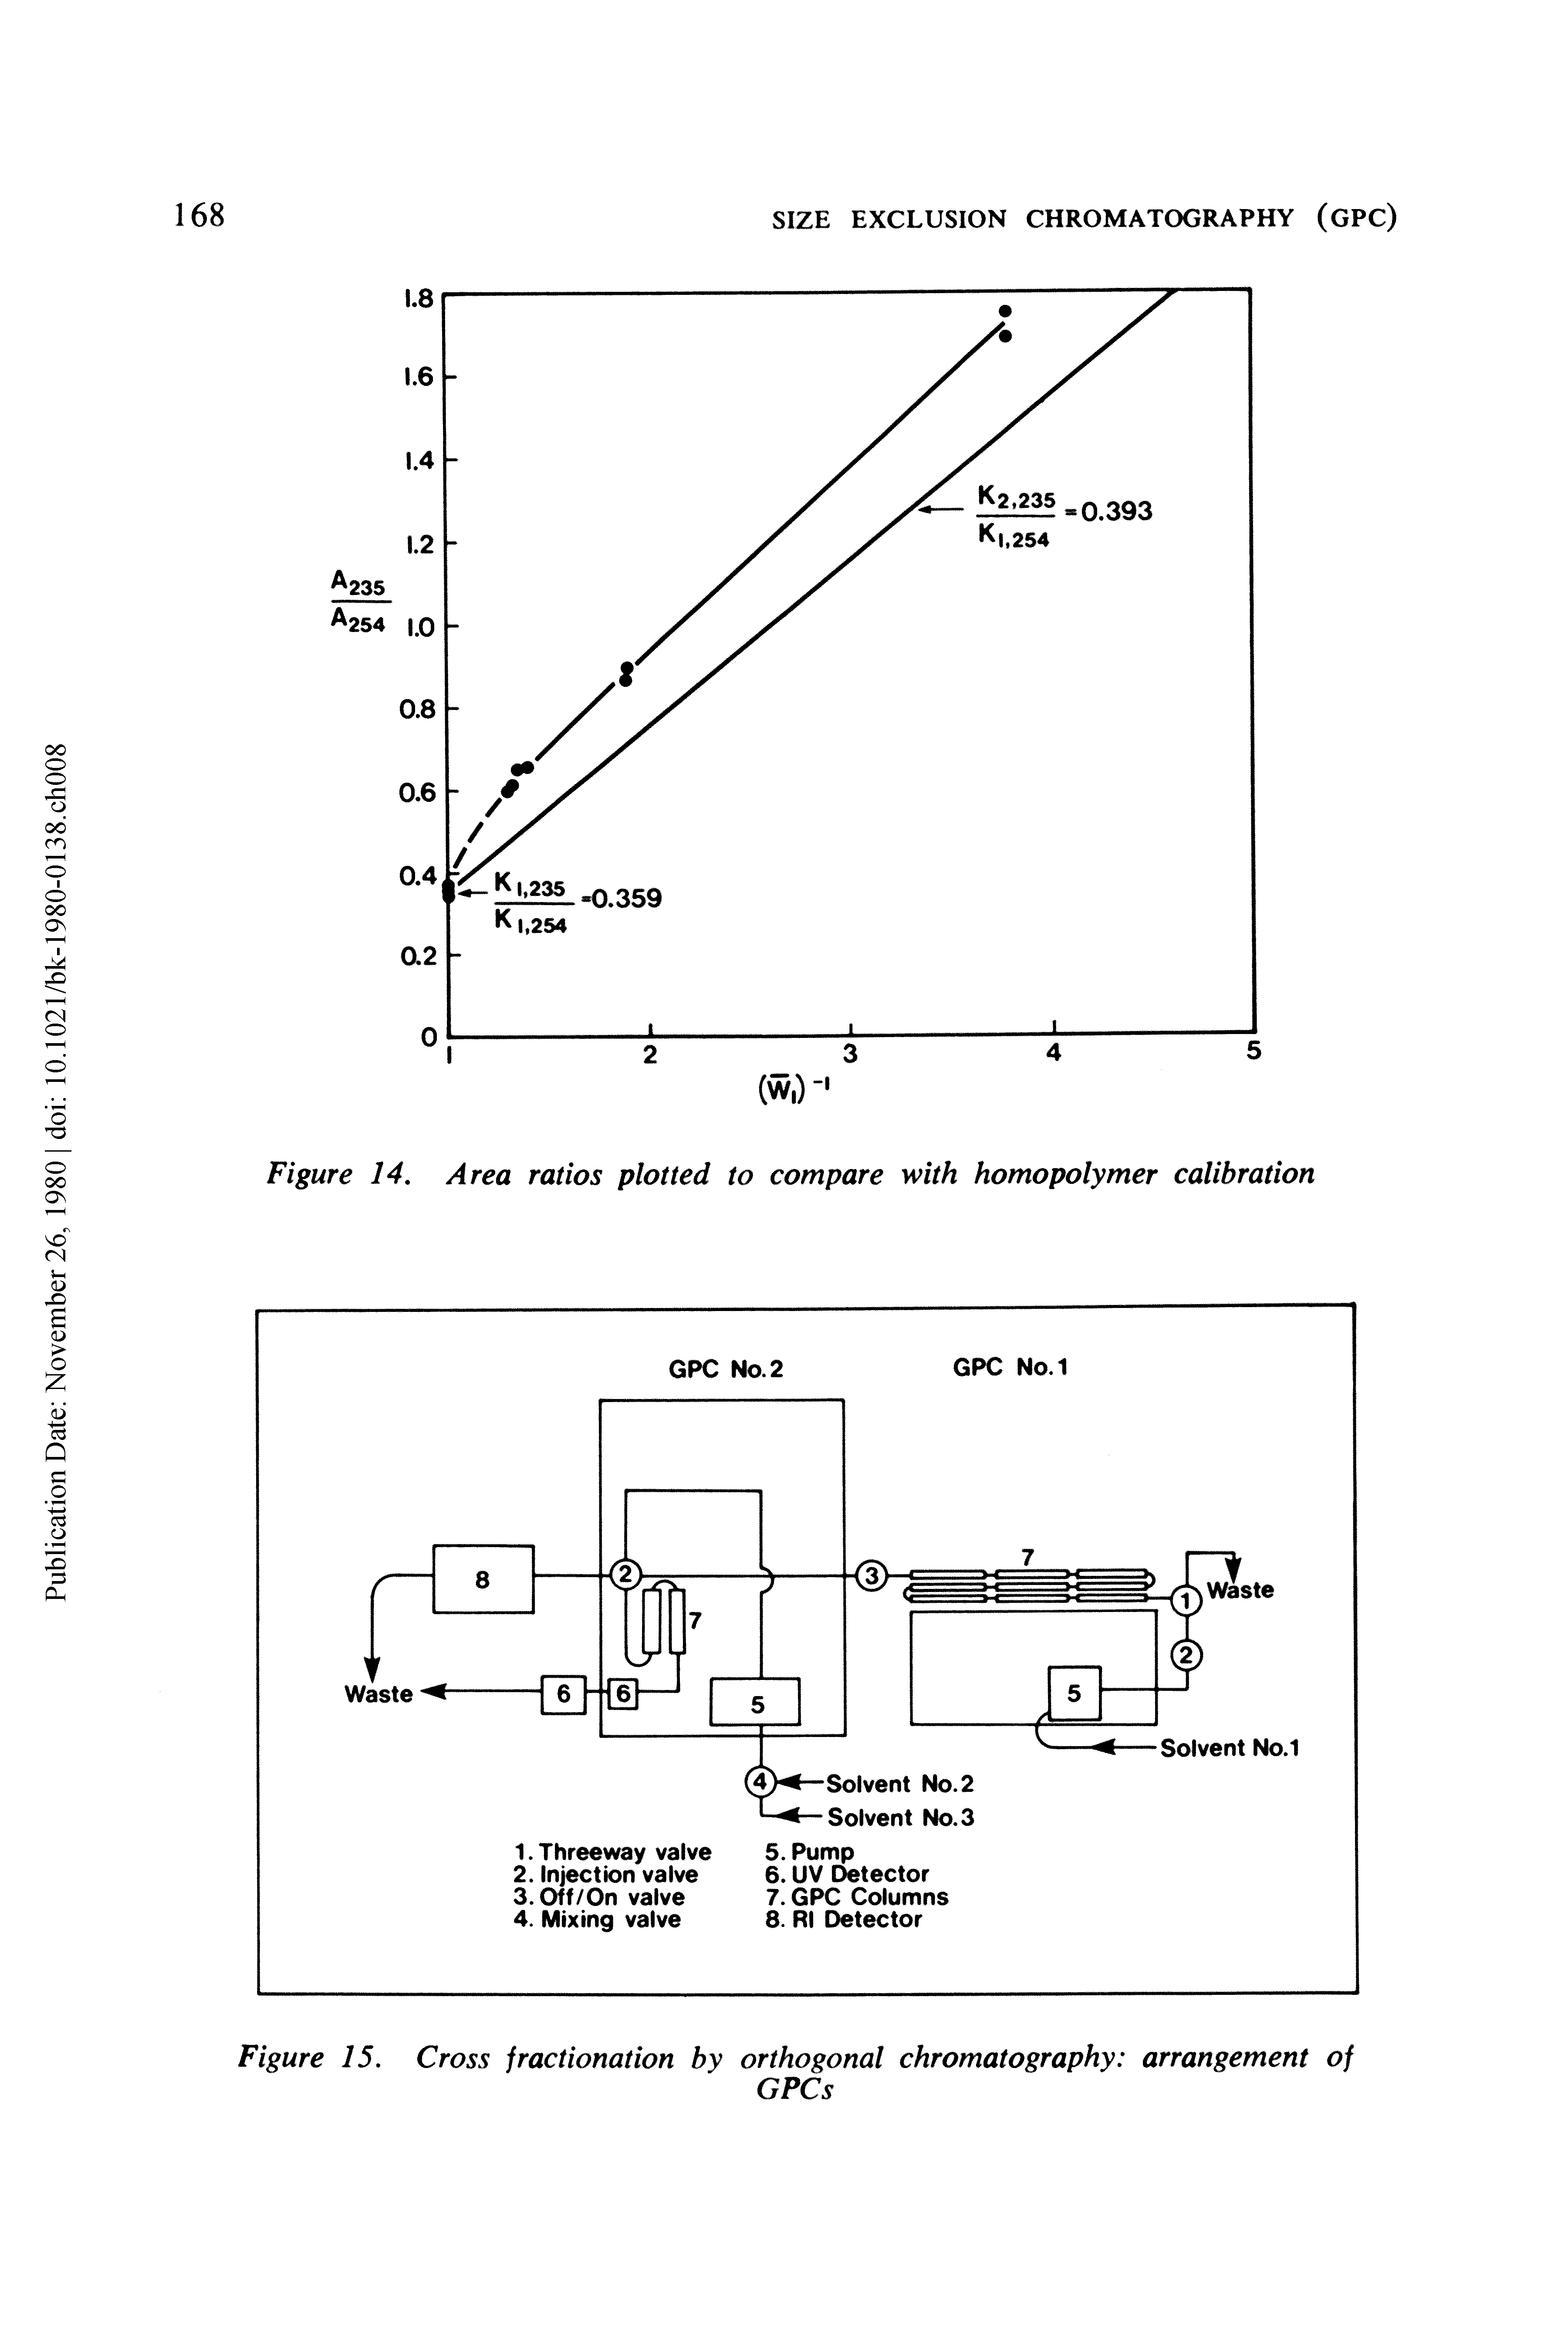 Figure 14. Area ratios plotted to compare with homopolymer calibration...